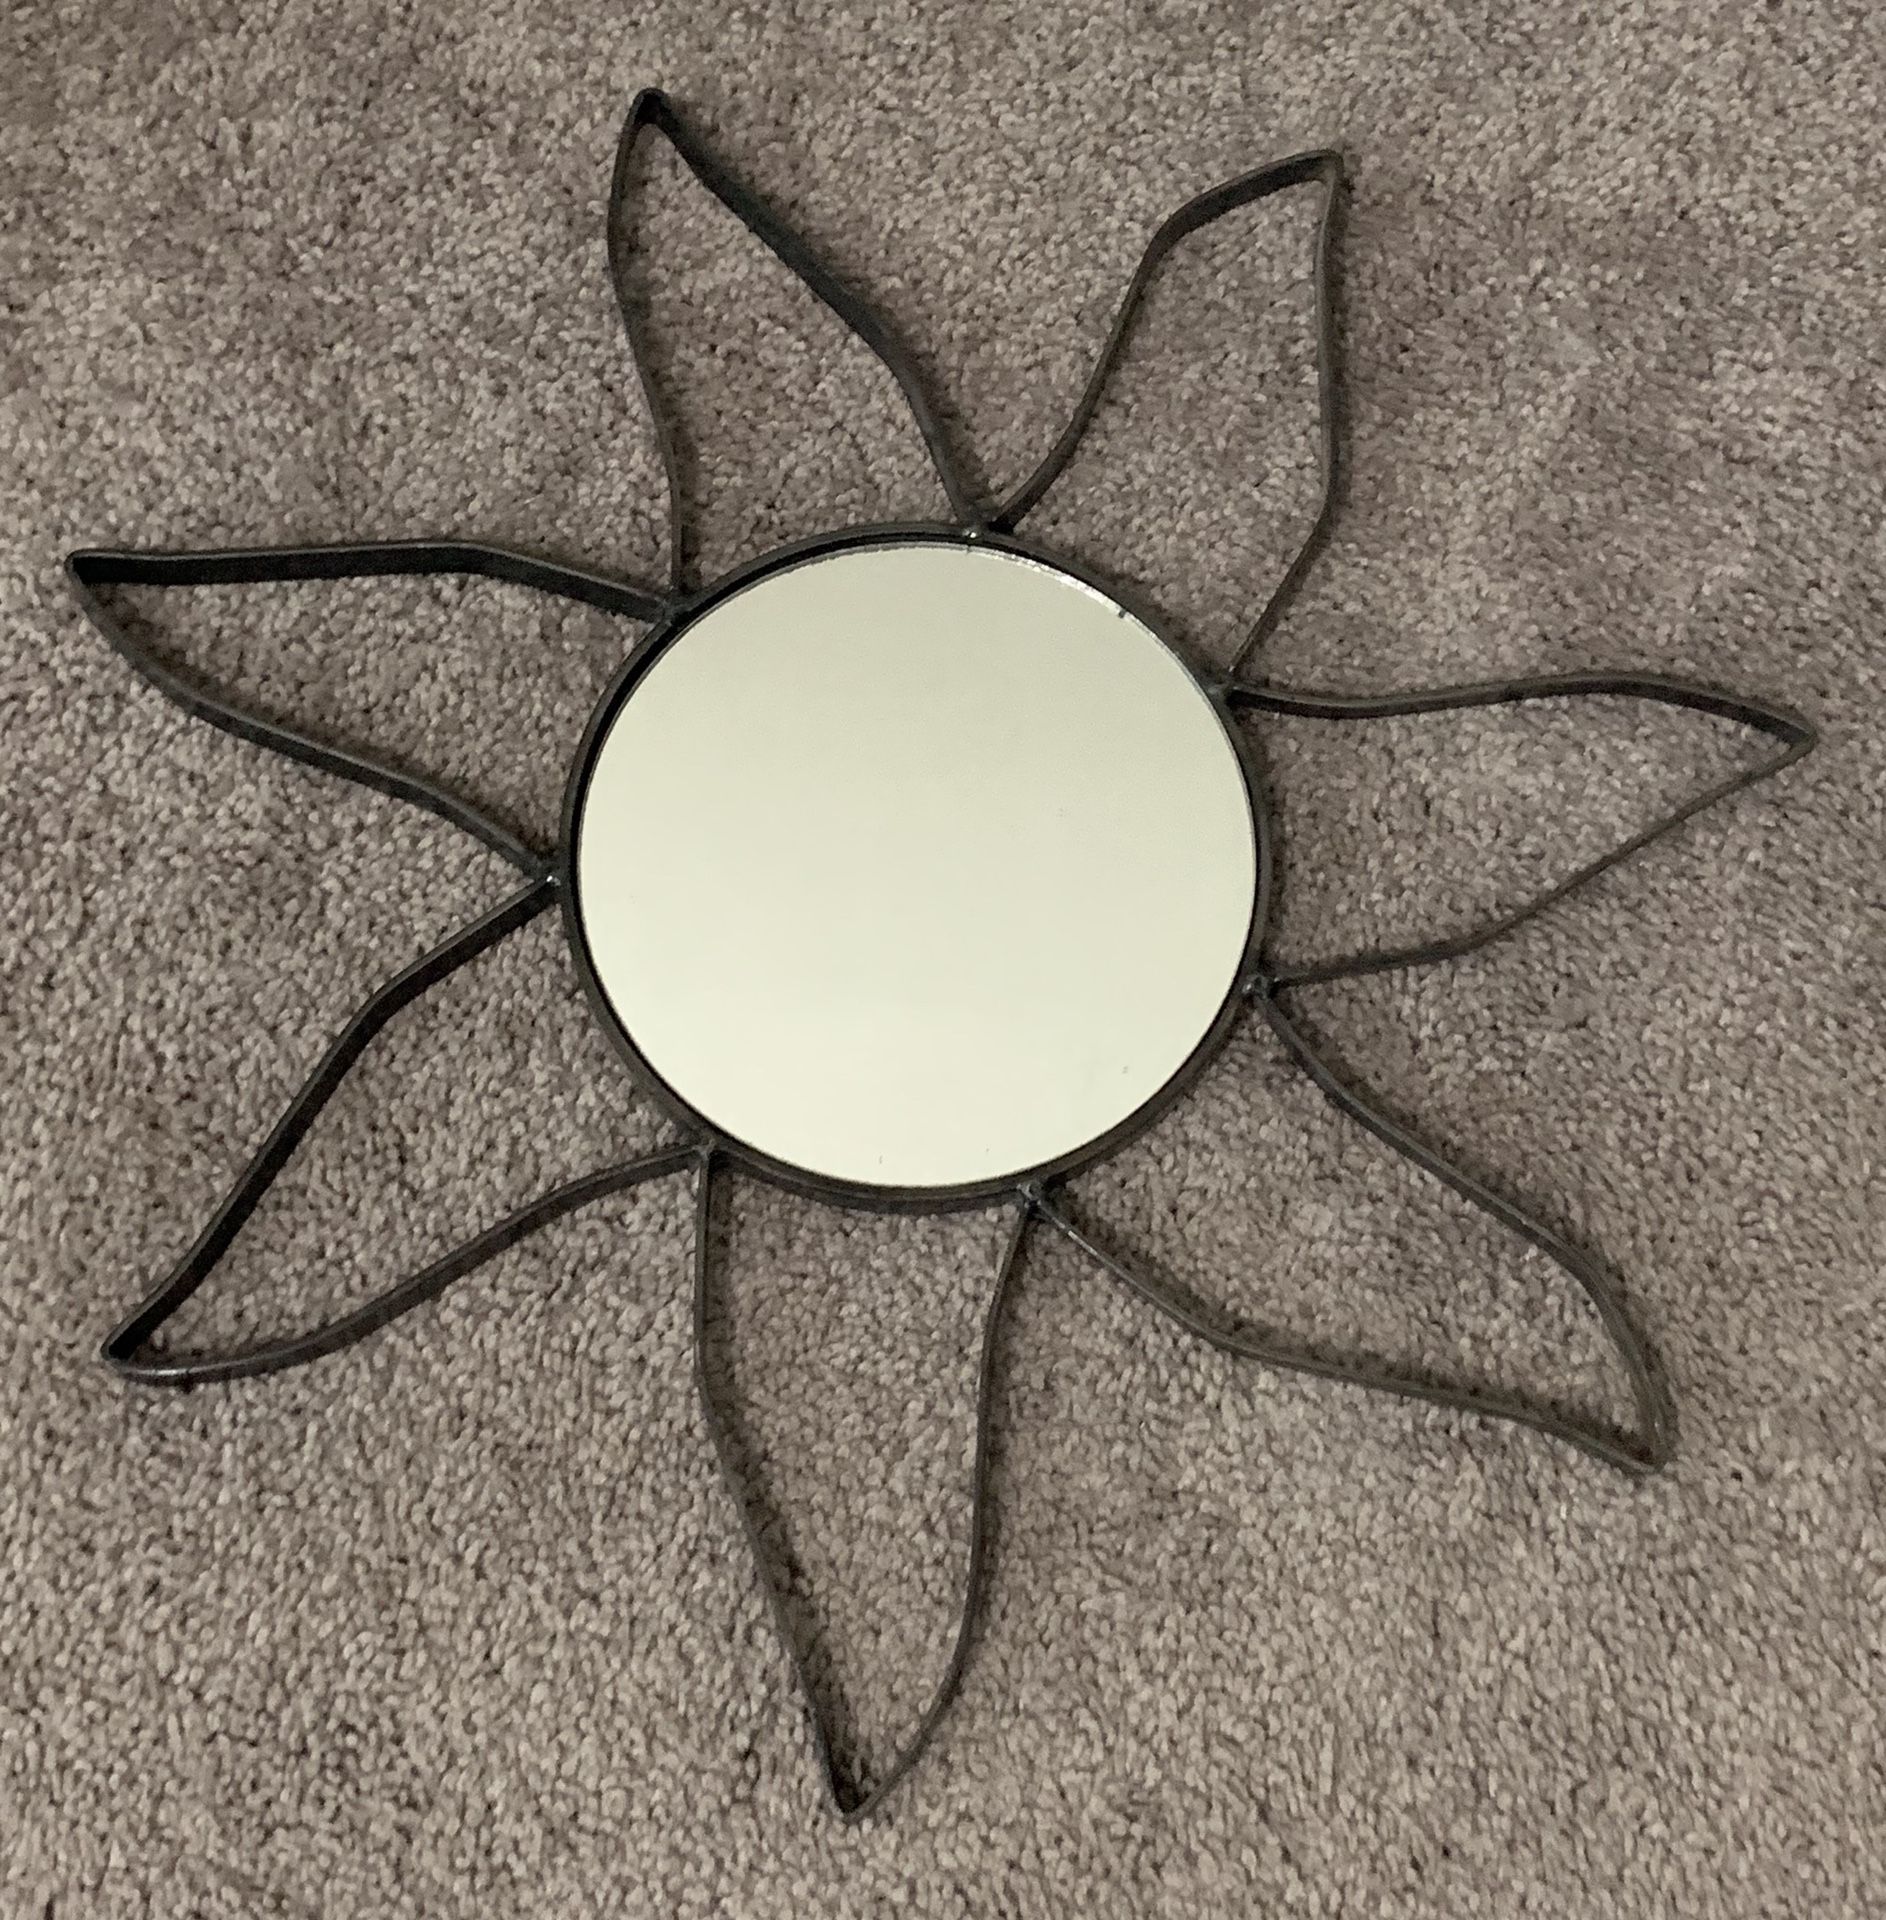 VINTAGE WROUGHT IRON WALL HANGING SUN MIRROR HOME DECOR ACCENT 16”